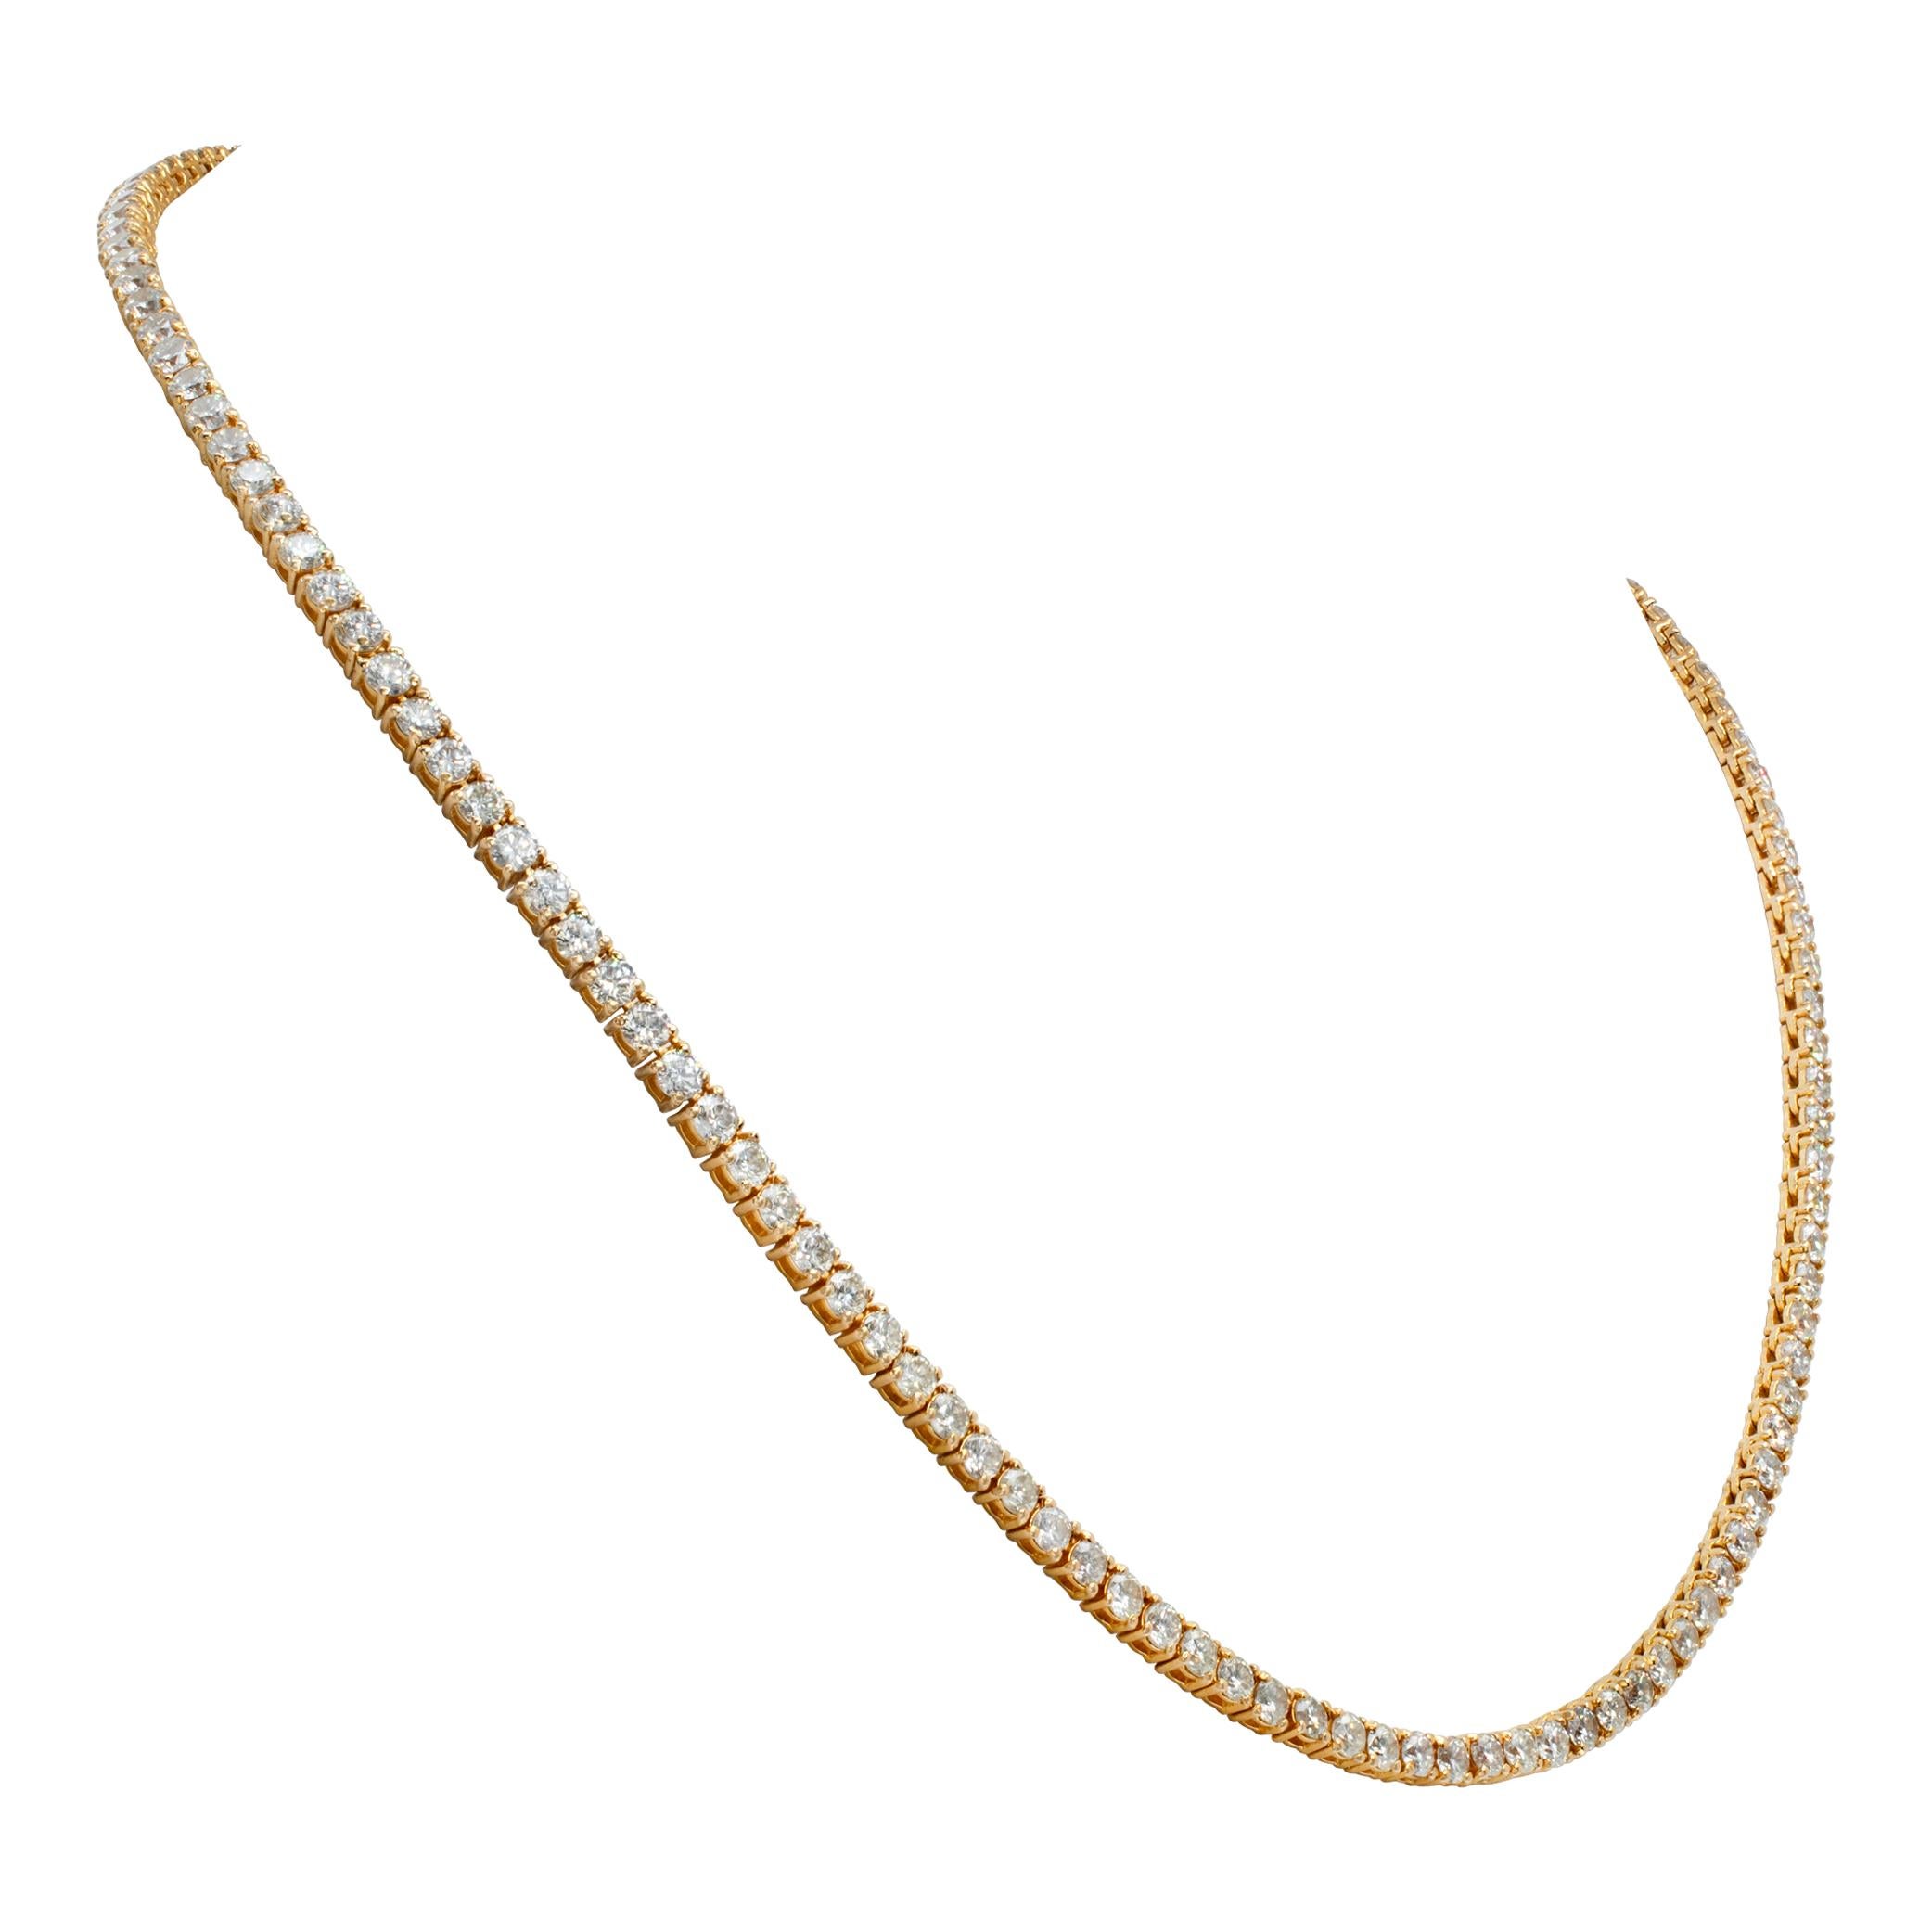 Diamond 14k yellow gold tennis necklace In Excellent Condition For Sale In Surfside, FL